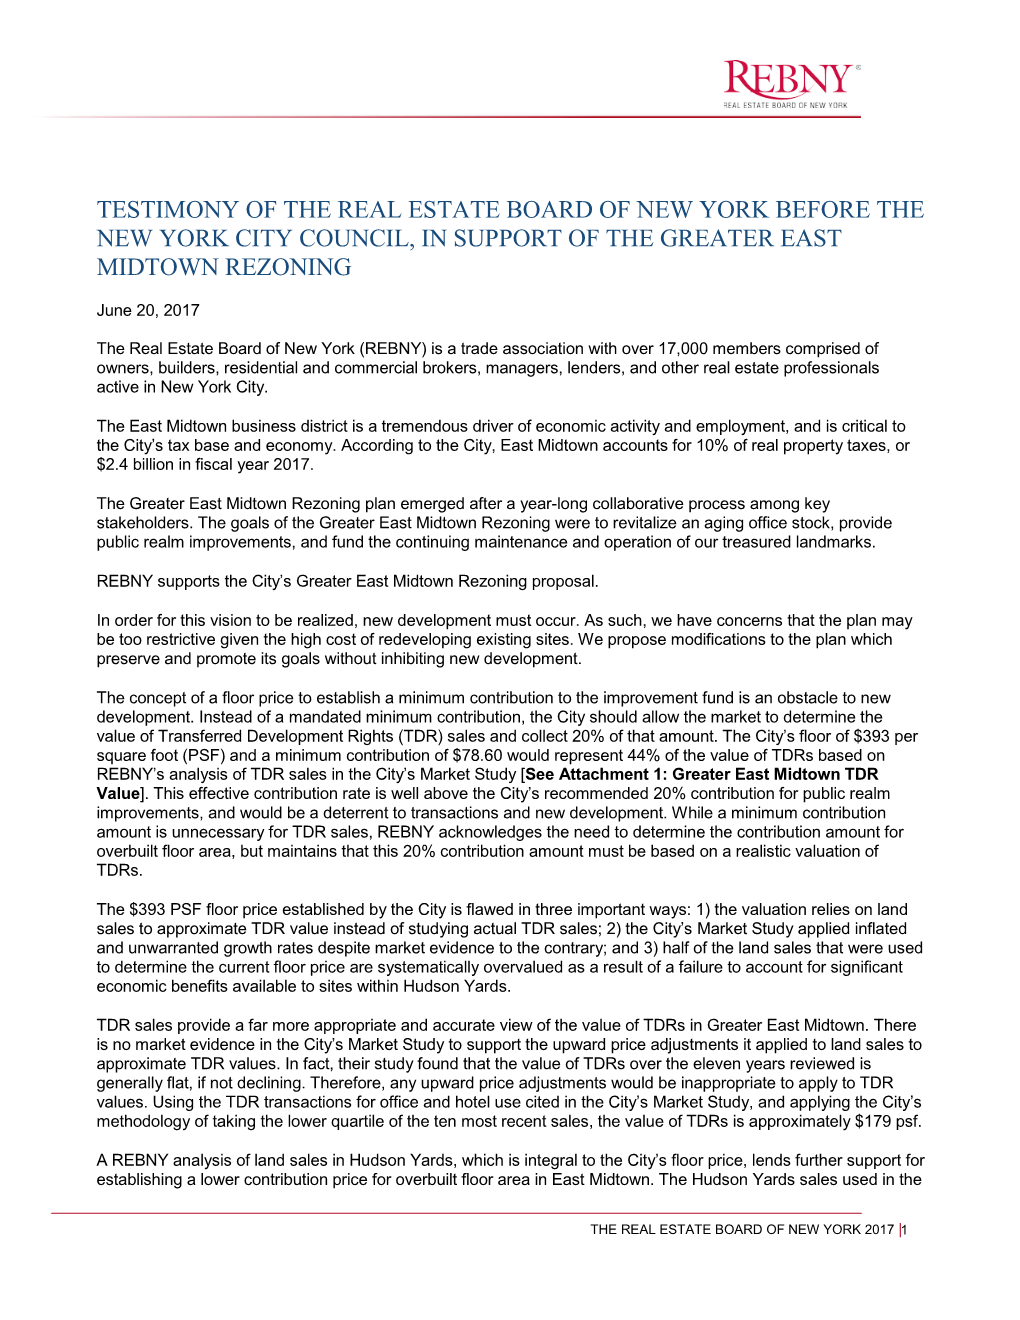 Testimony of the Real Estate Board of New York Before the New York City Council, in Support of the Greater East Midtown Rezoning